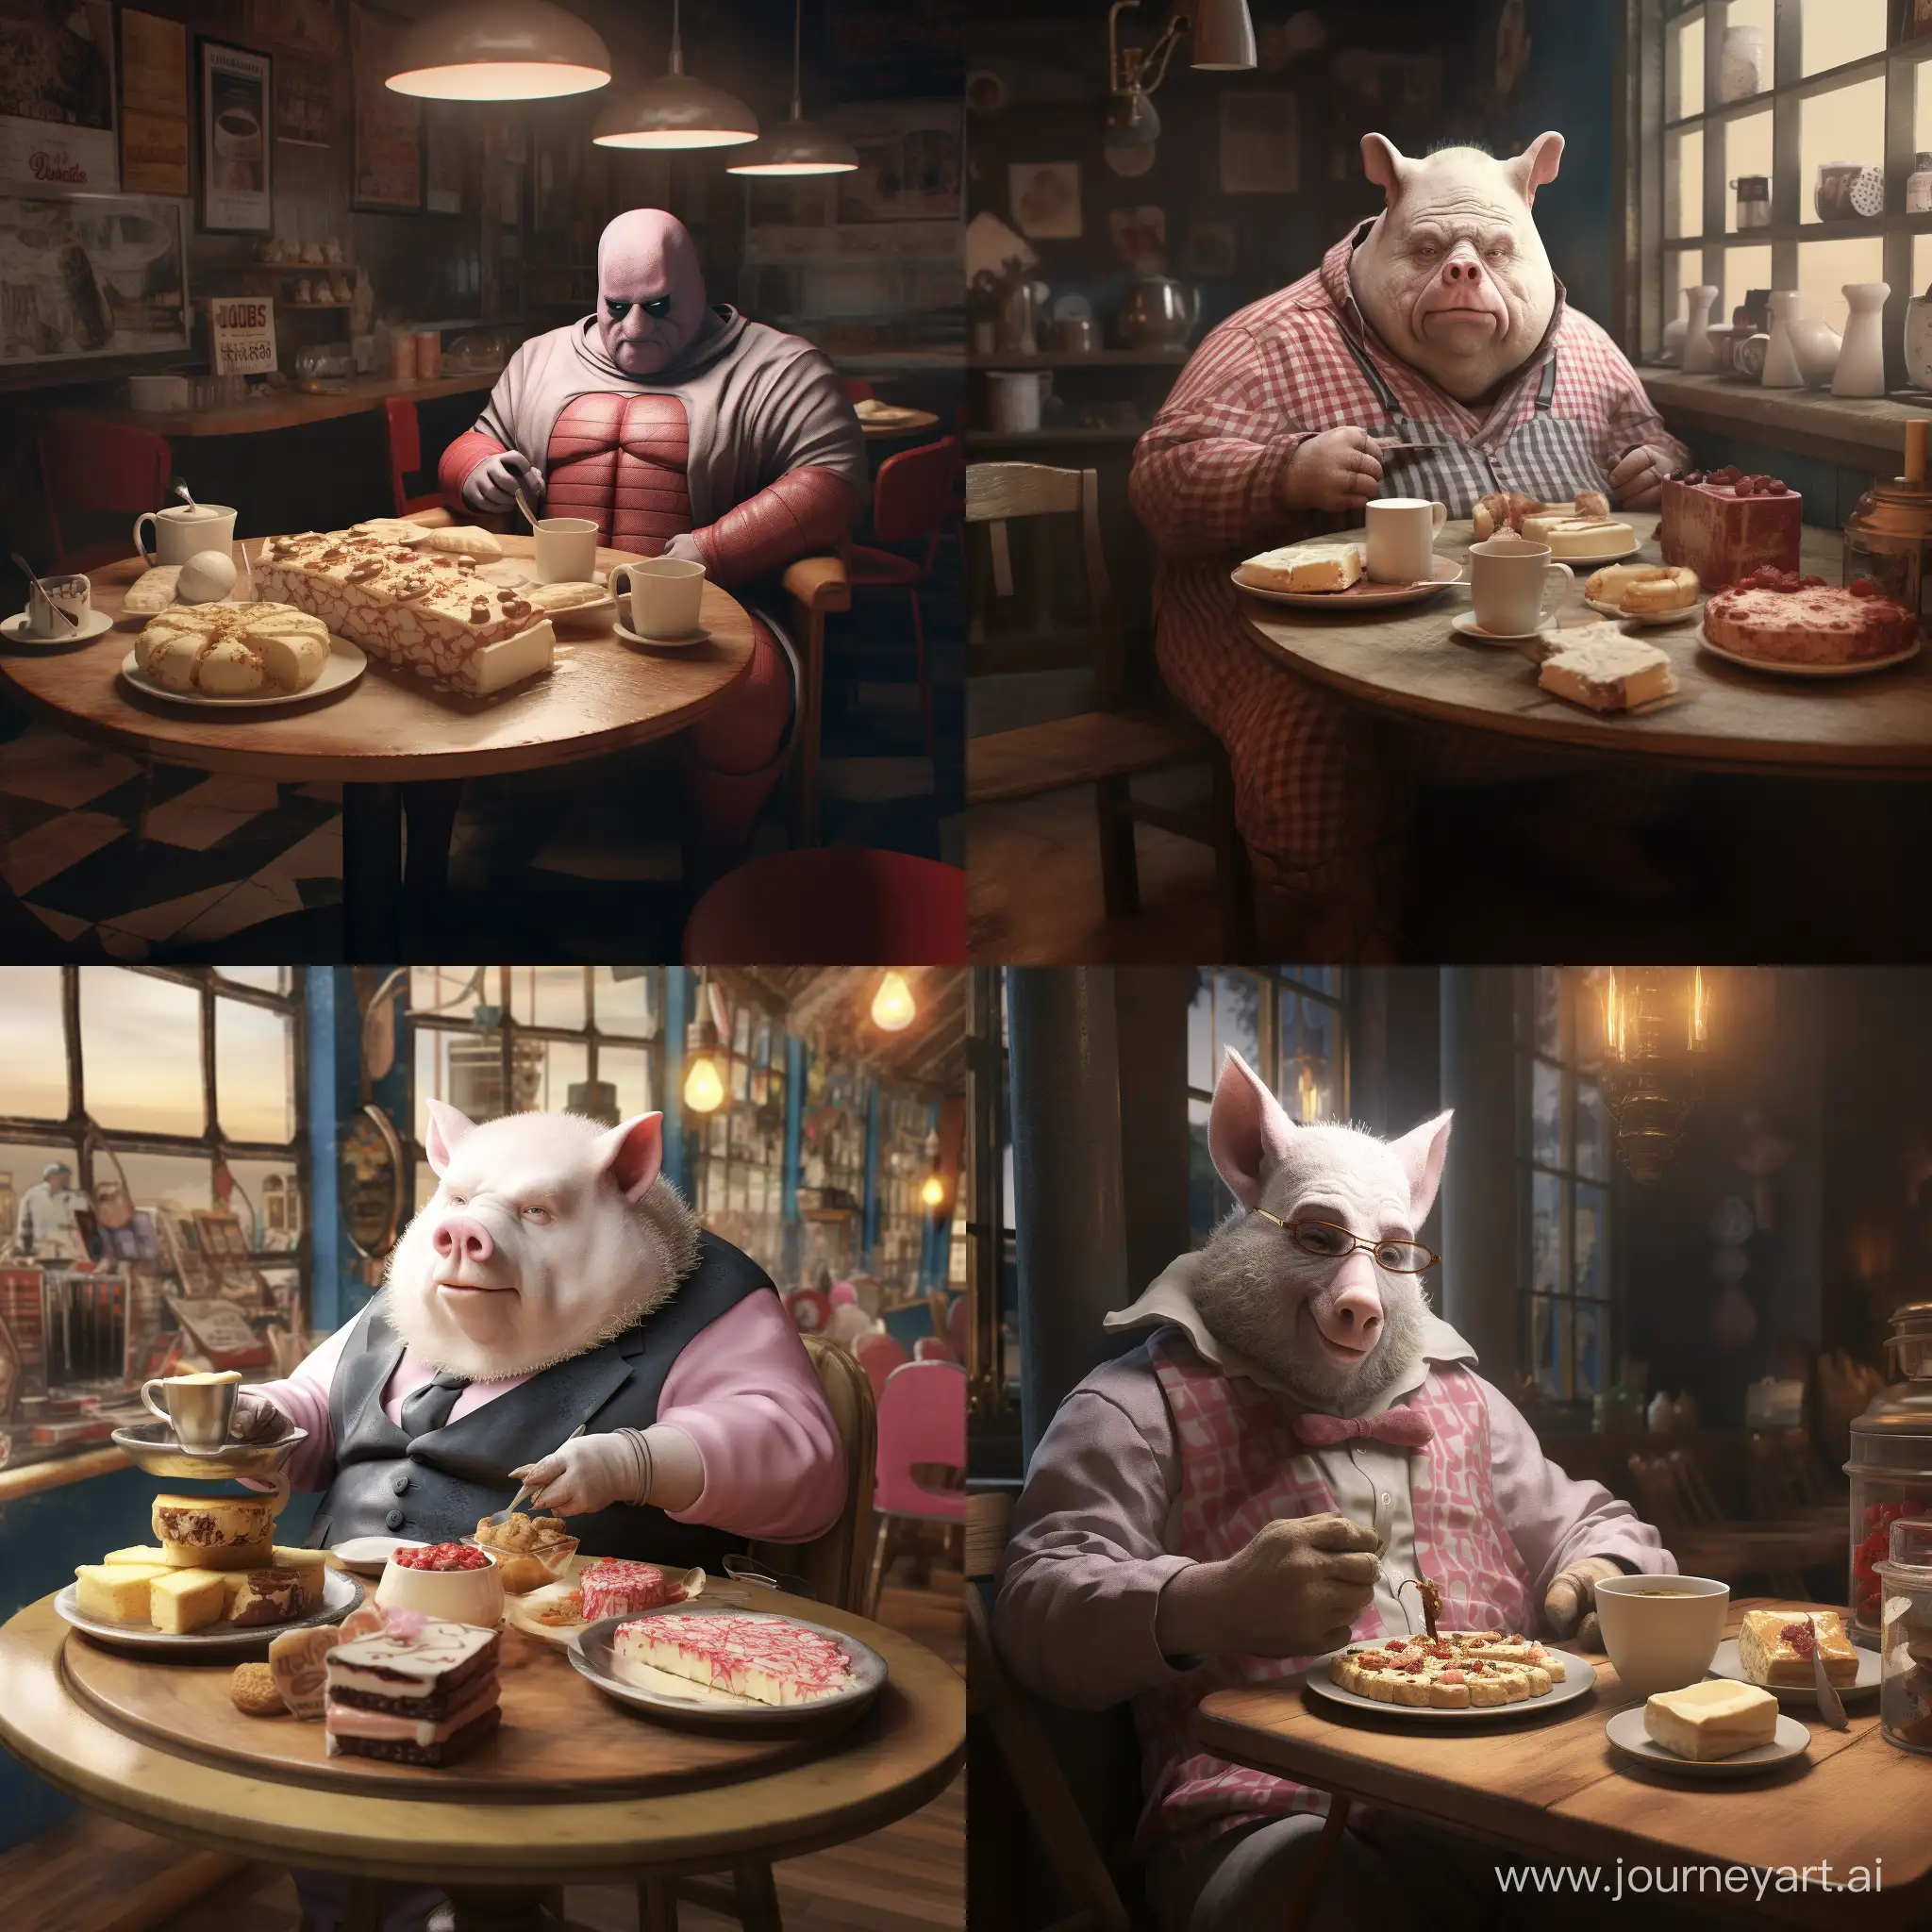 Charming-Pigman-Delights-in-Cheesecake-Indulgence-at-Cozy-Cafe